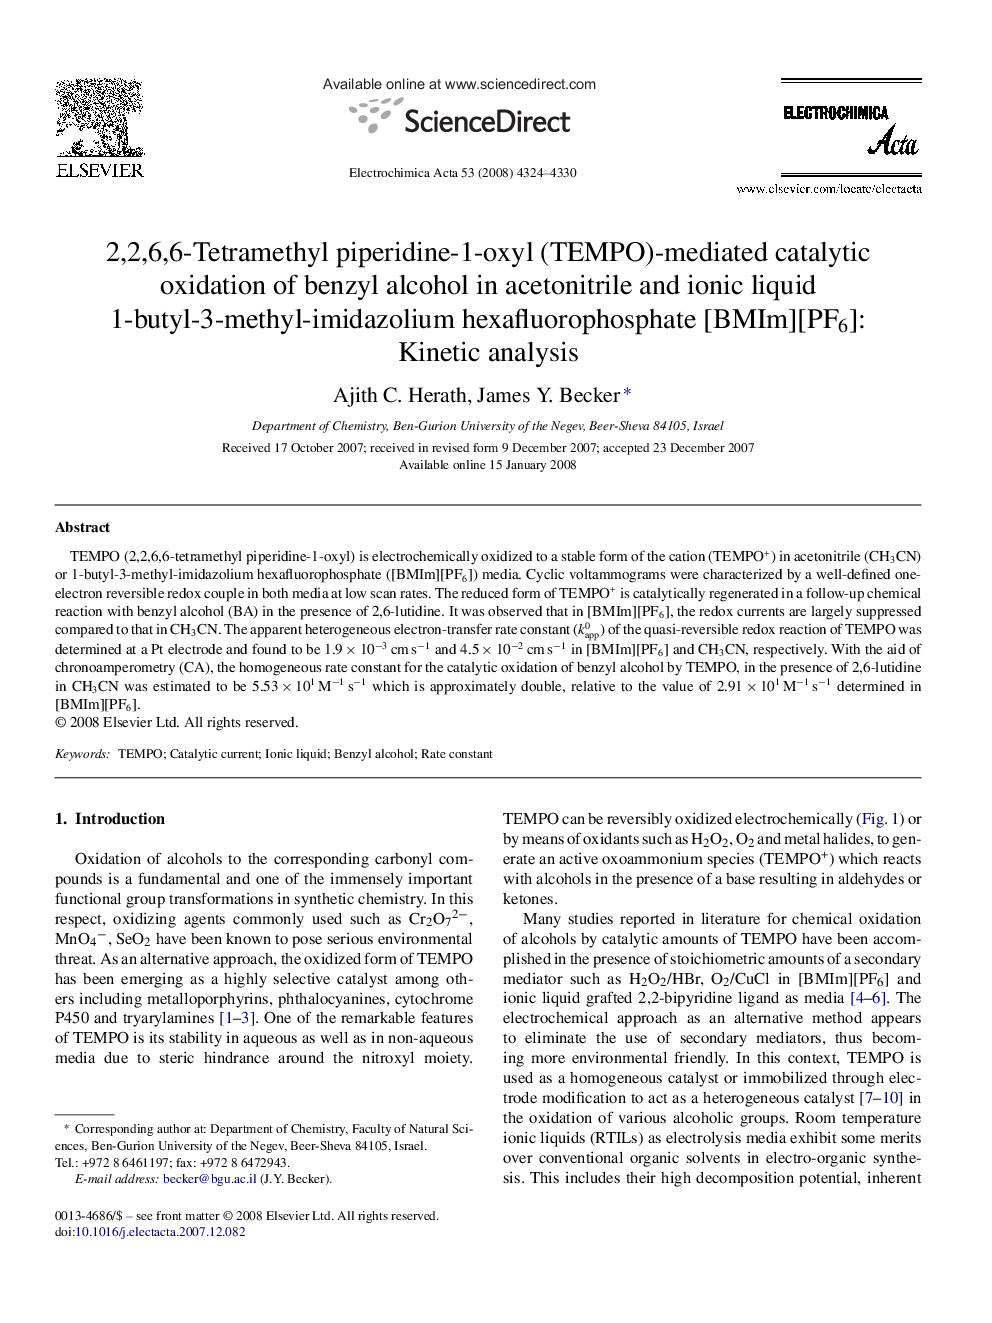 2,2,6,6-Tetramethyl piperidine-1-oxyl (TEMPO)-mediated catalytic oxidation of benzyl alcohol in acetonitrile and ionic liquid 1-butyl-3-methyl-imidazolium hexafluorophosphate [BMIm][PF6]: Kinetic analysis